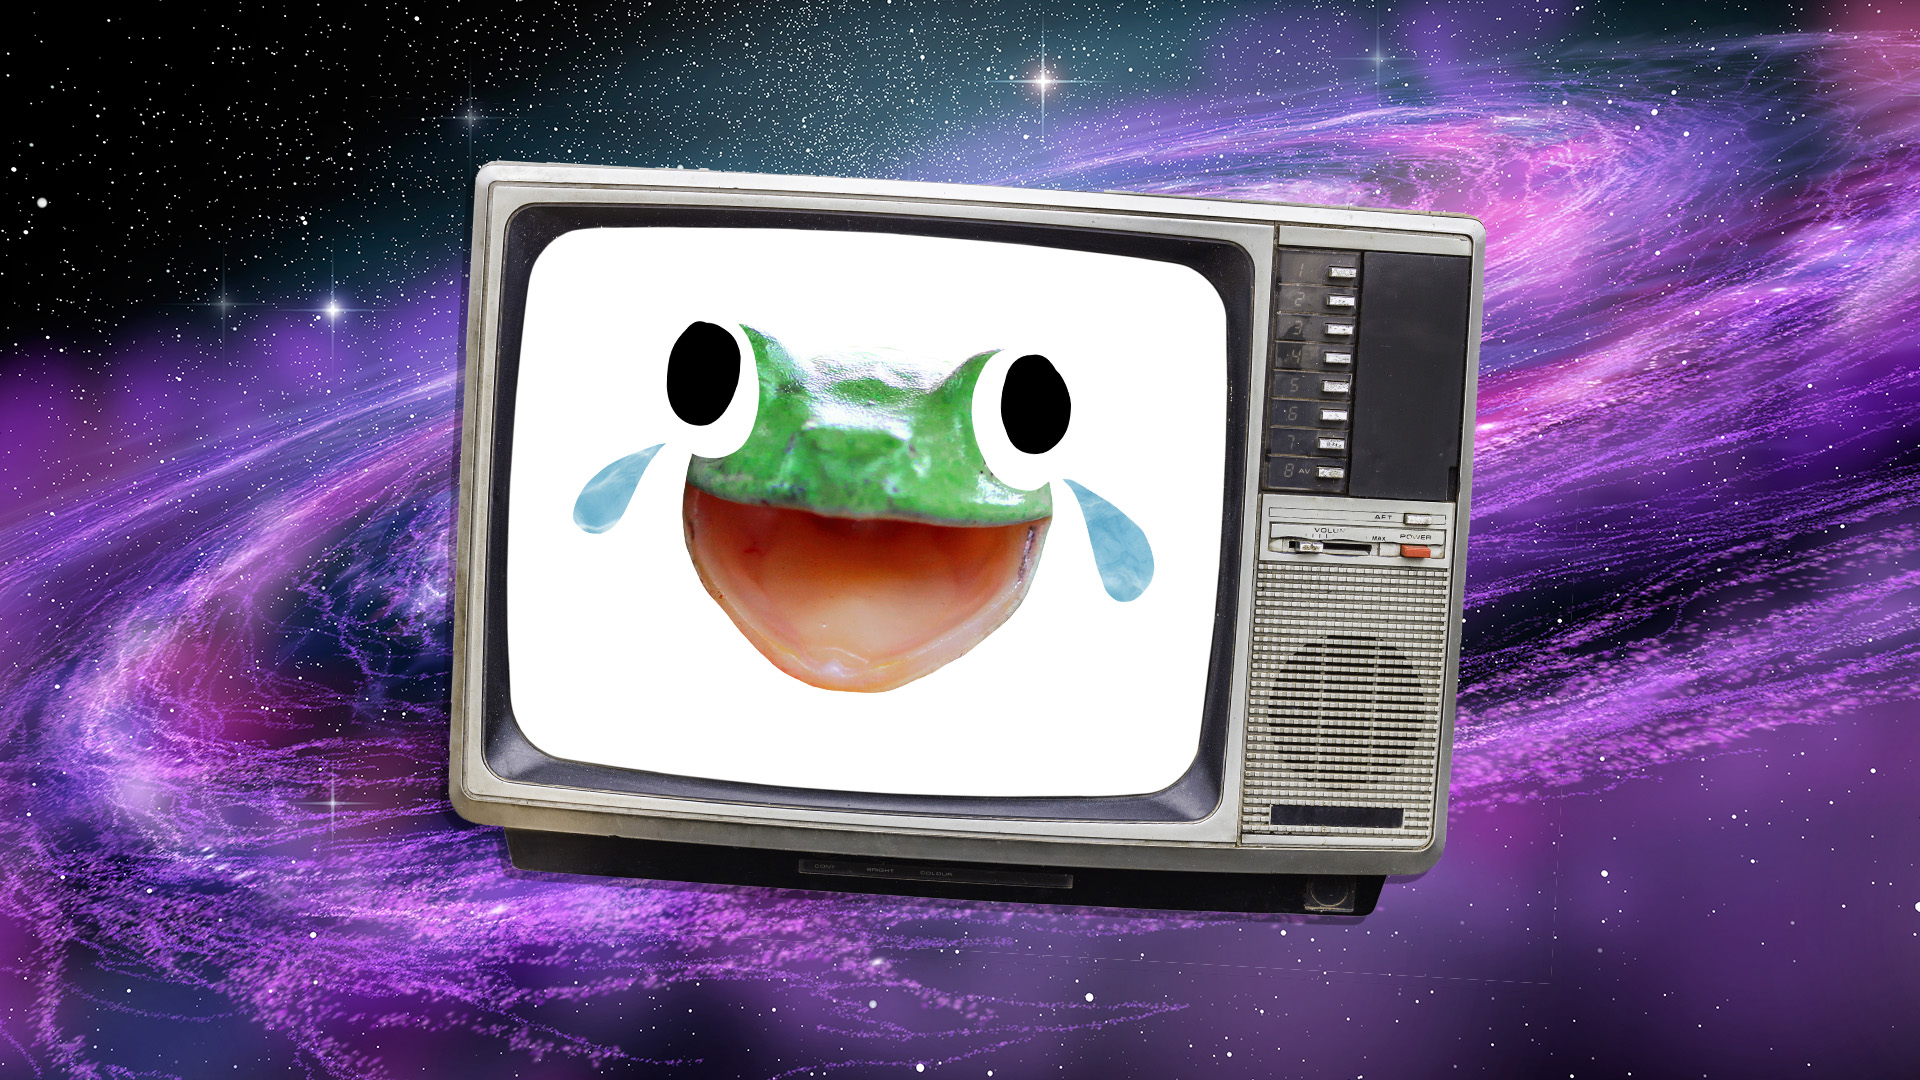 A laughing frog on an old TV set